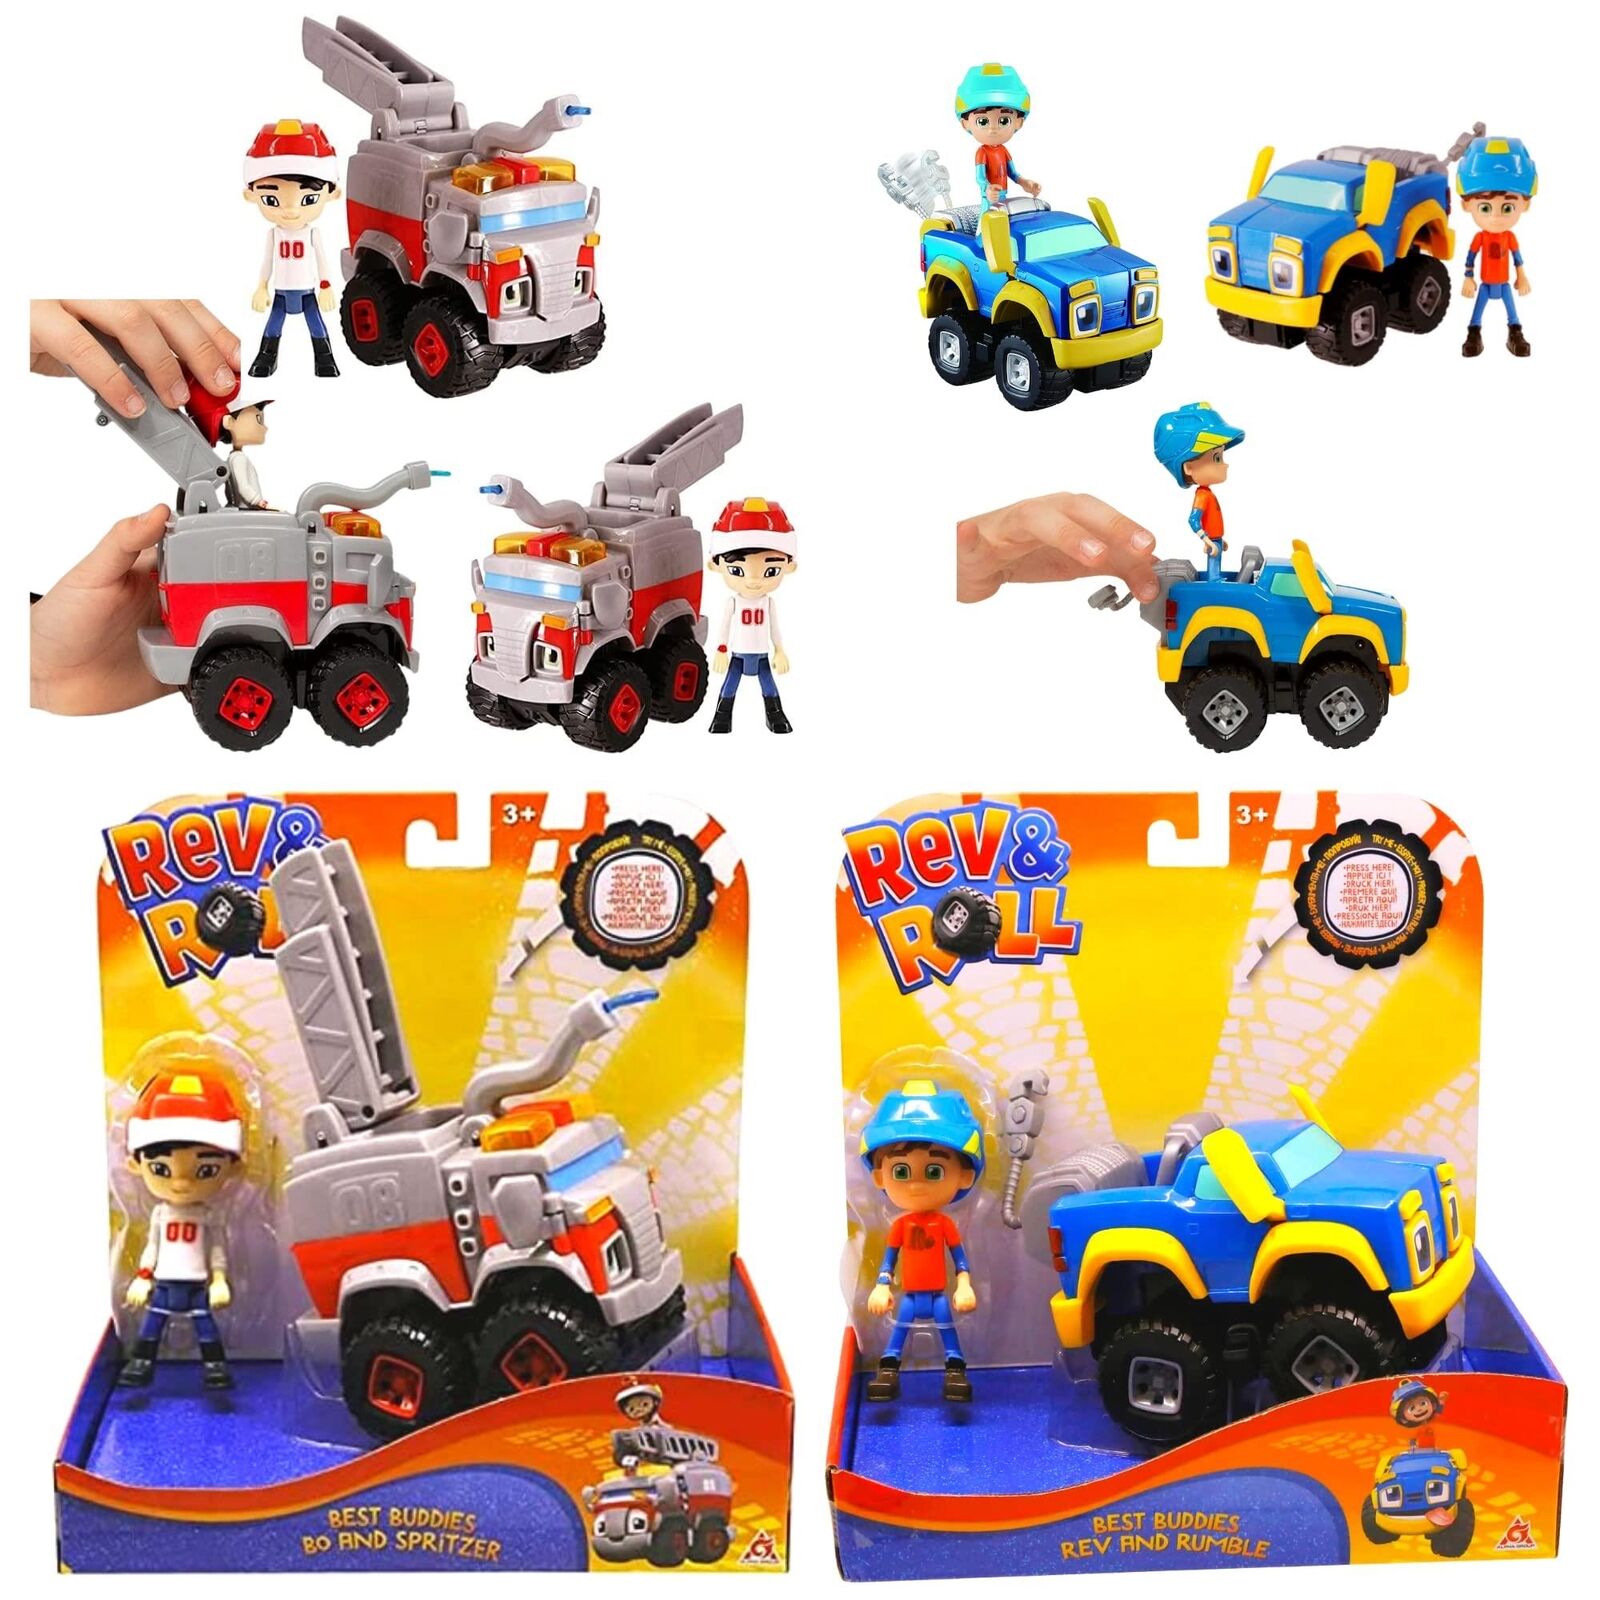 Rev & Roll Best Buddies Figure and Vehicles Twin Pack - Bo and Spritzer & Rev and Rumble - Toptoys2u